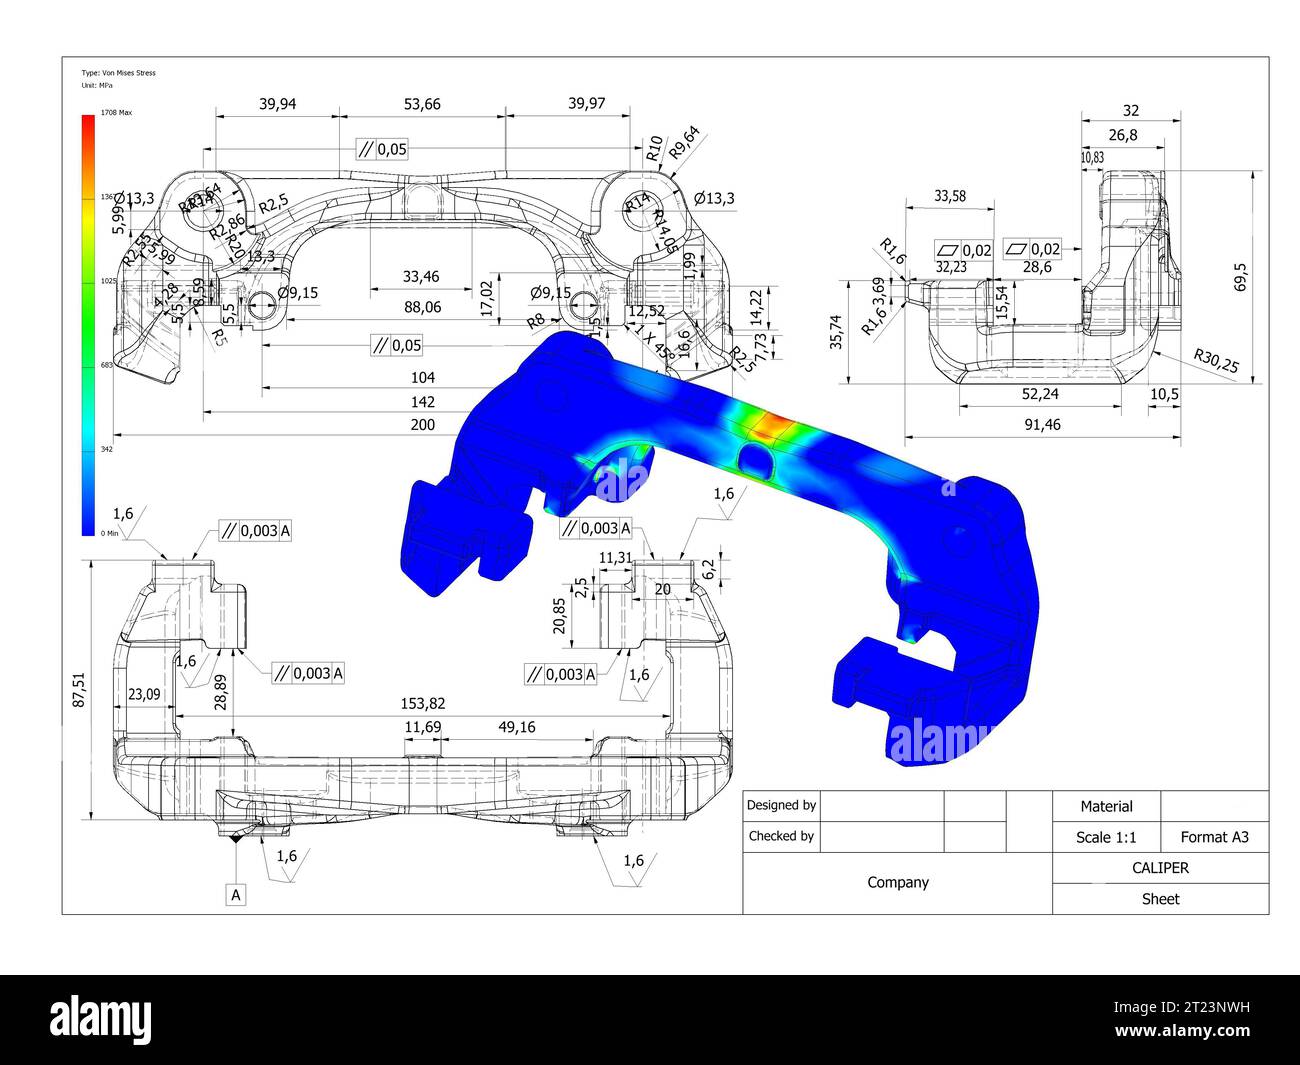 caliper car technical design ,forces applied fem finite analysis, engineering testing before manufacturing Stock Photo